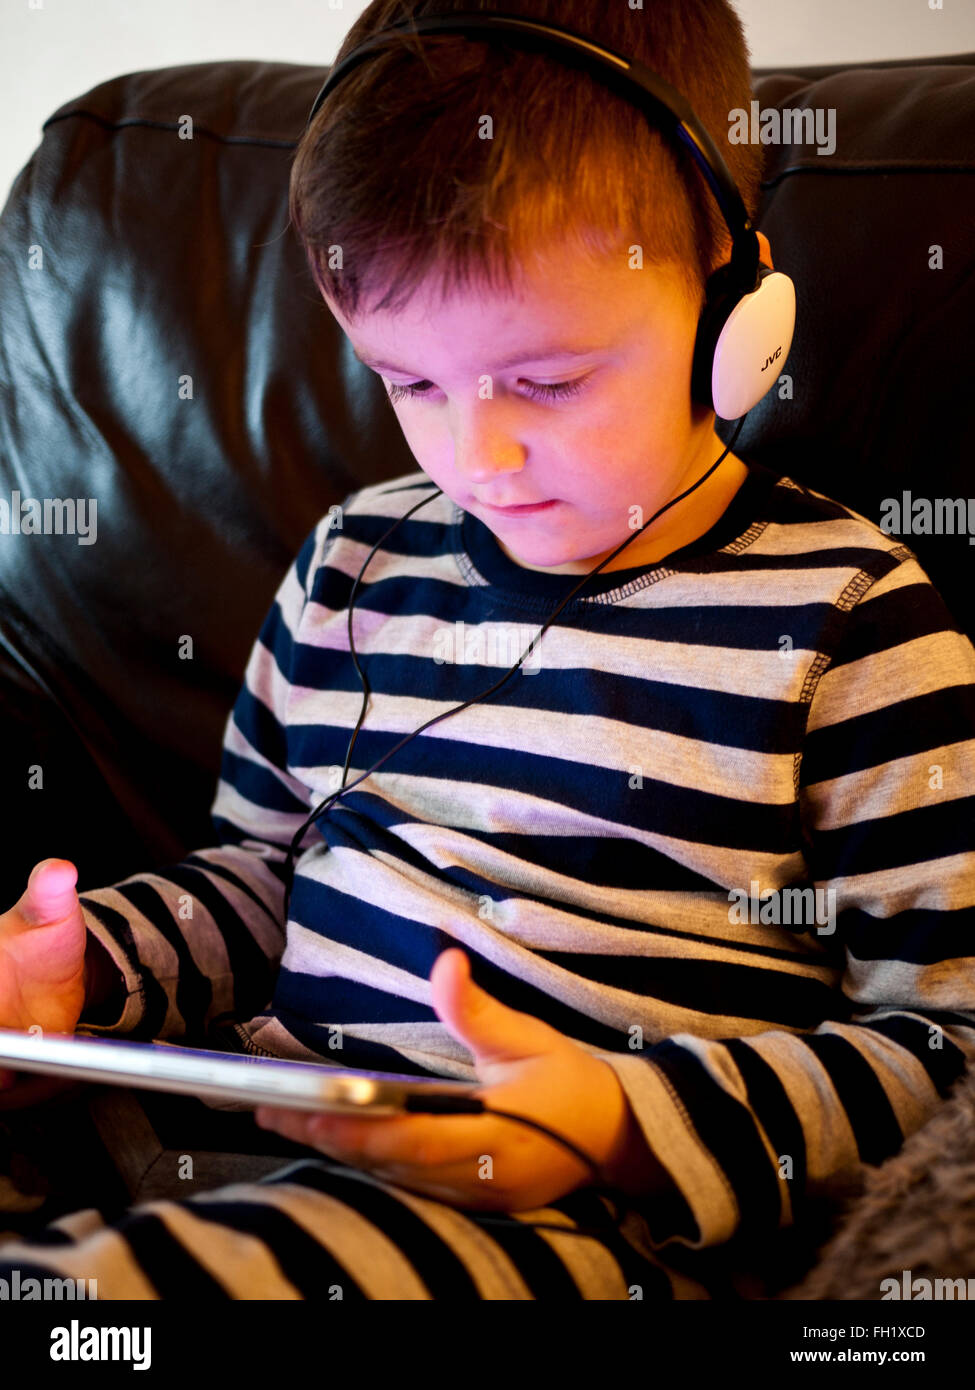 Young 5 year old boy using an i pad with ear phones, UK. Stock Photo